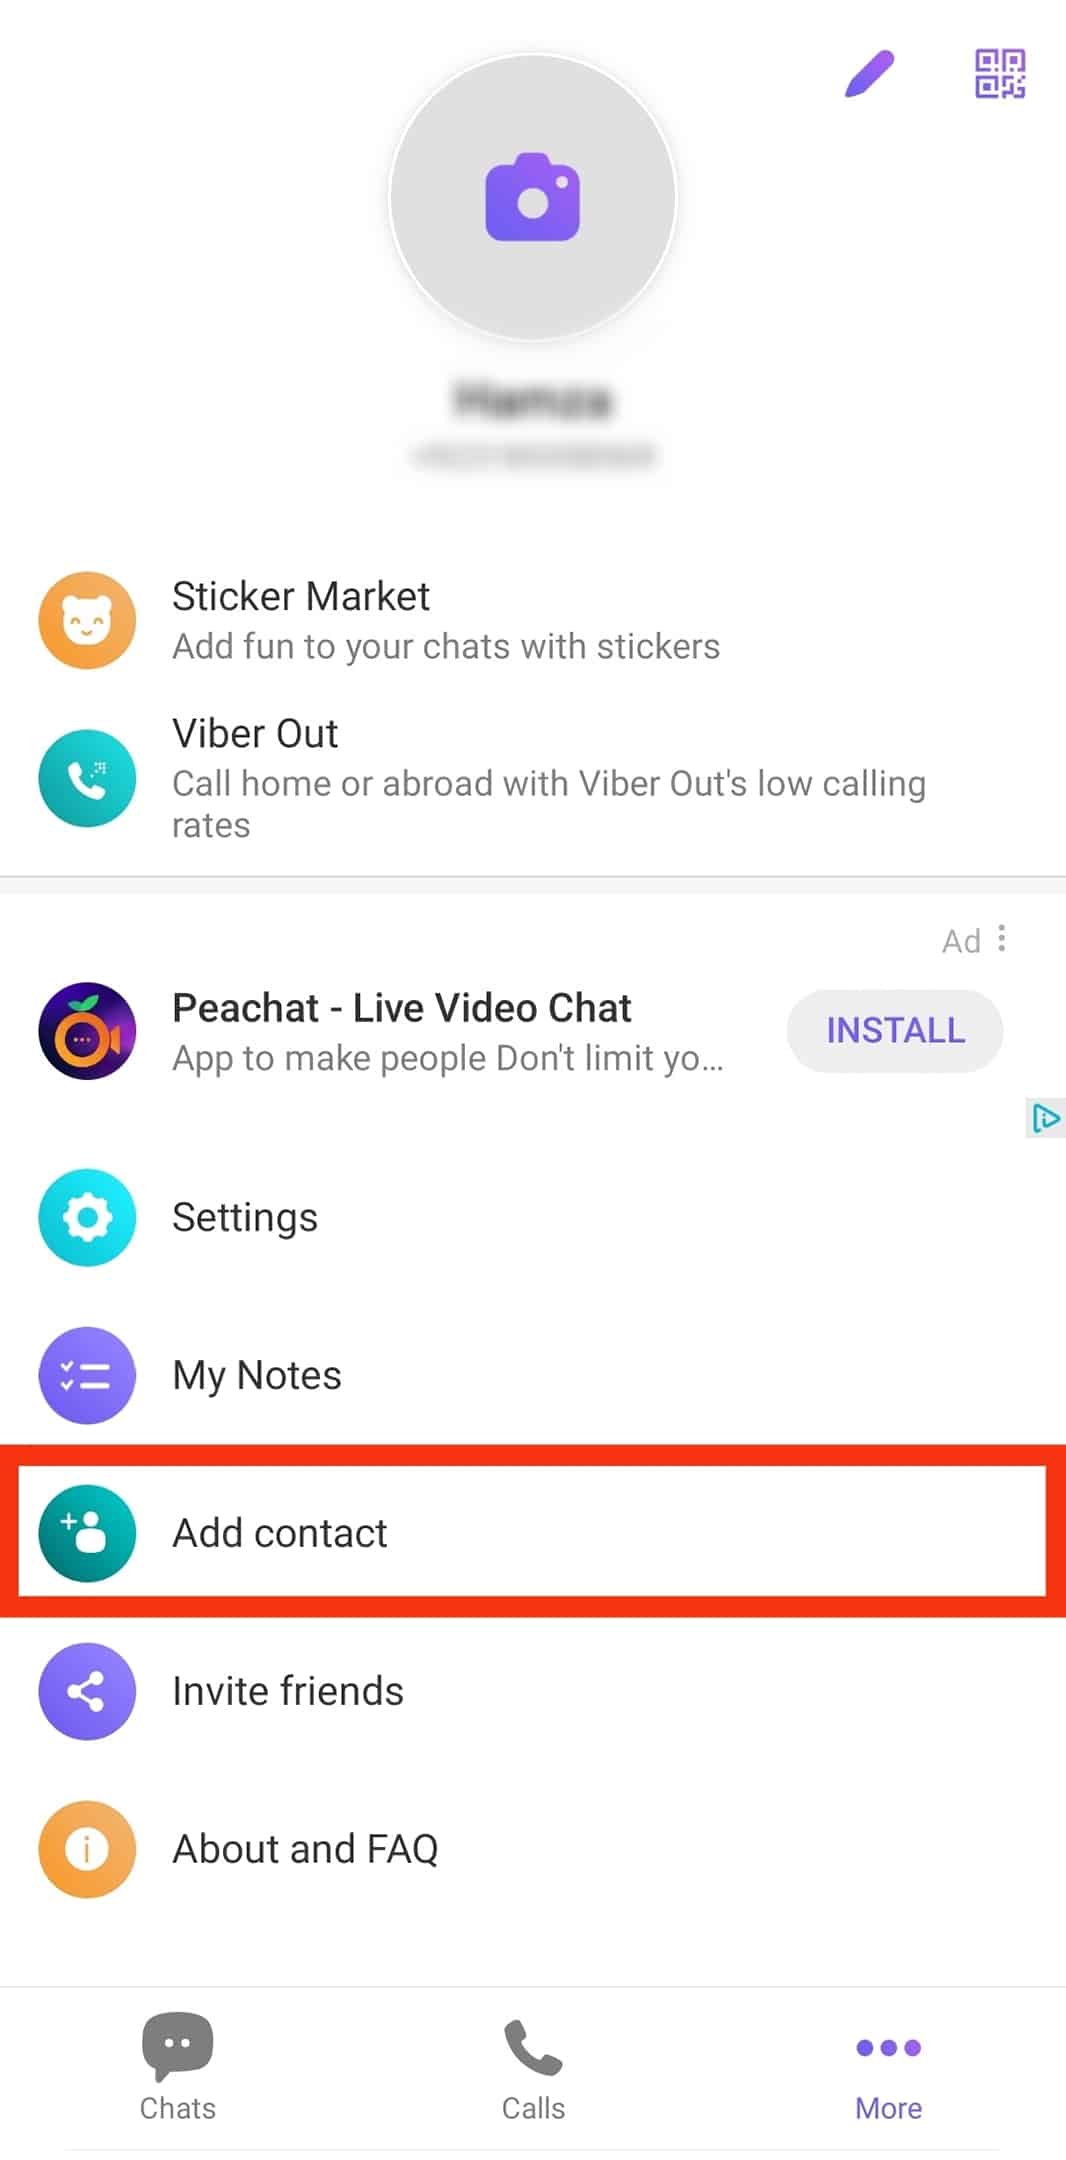 Click The Add Contact Button